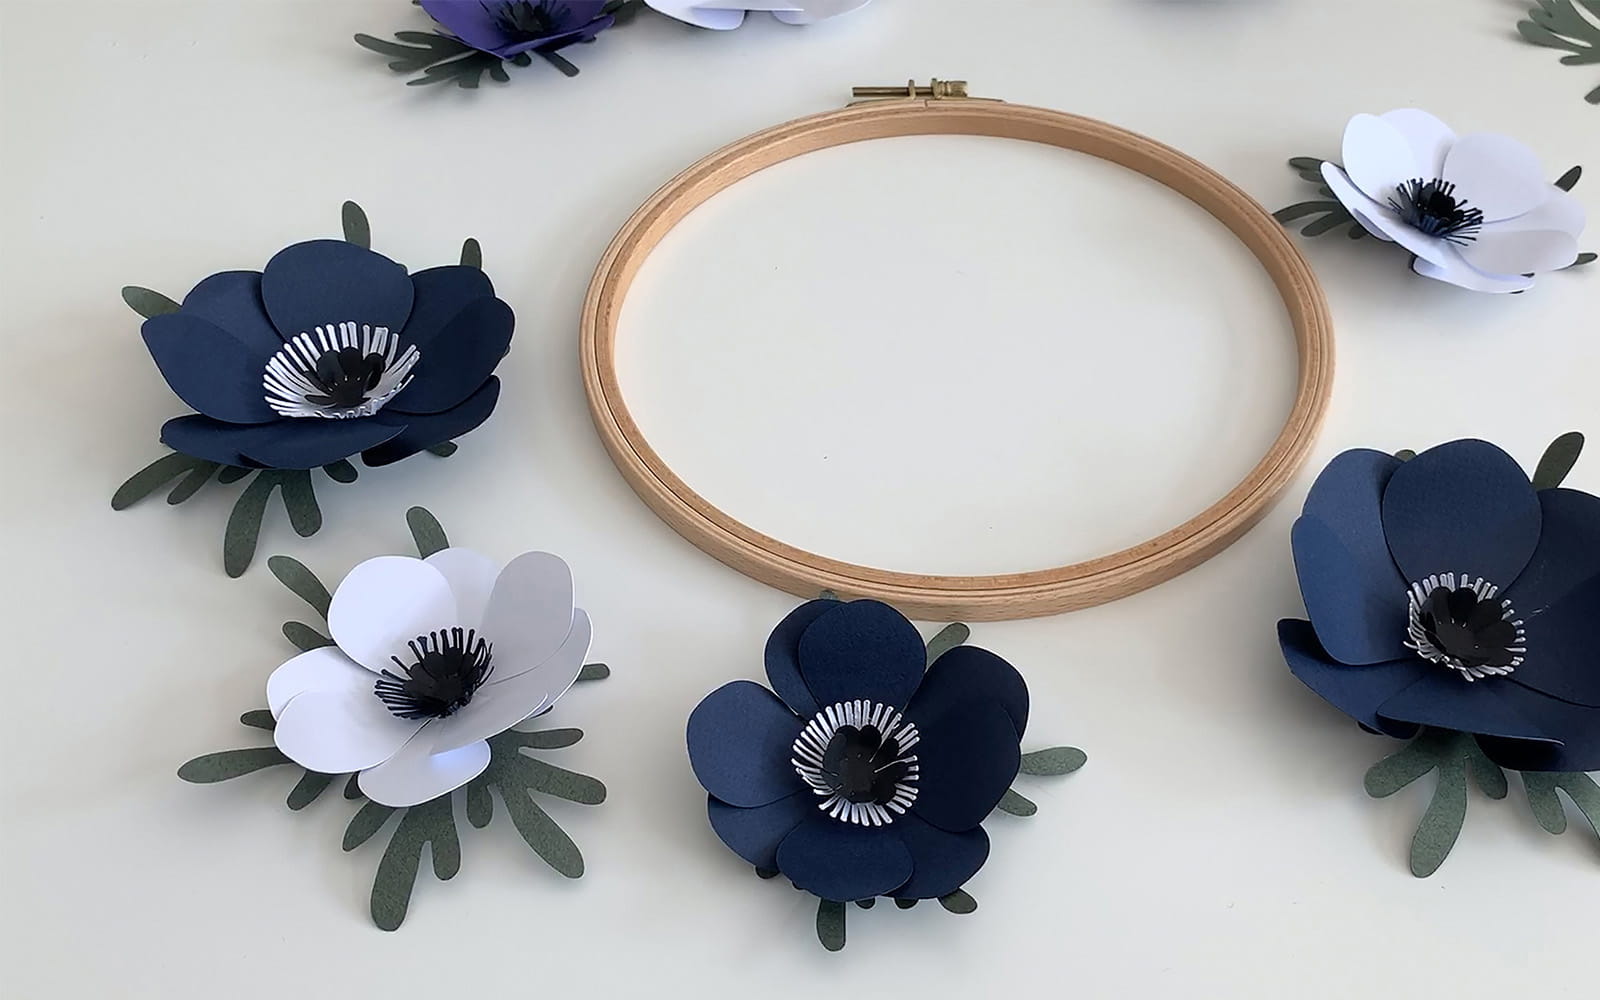 A wooden embroidery hoop with blue and white paper flowers around